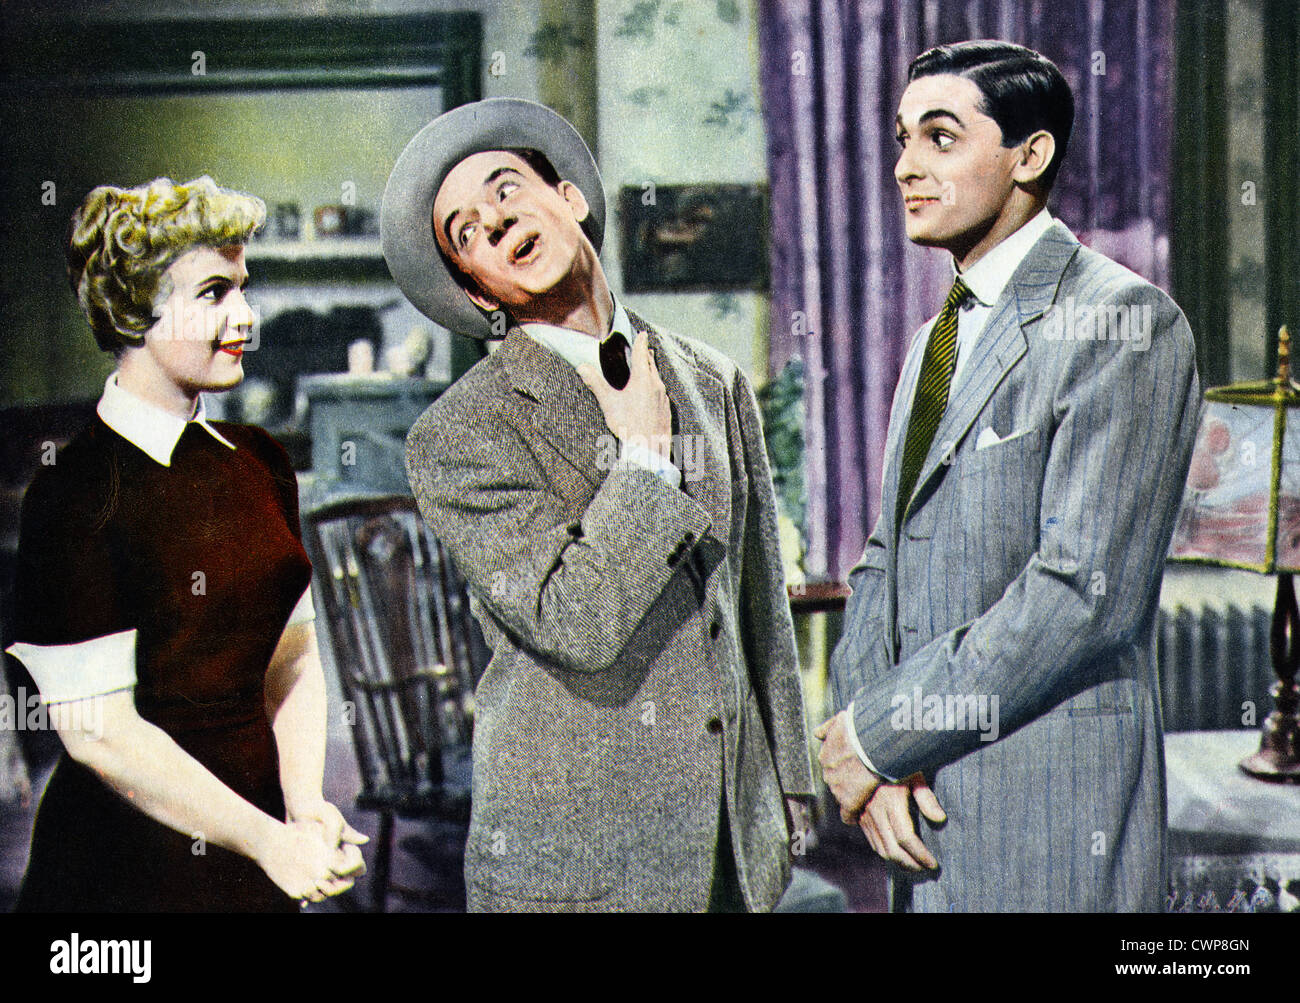 THE EDDIE CANTOR STORY (1953) MARILYN ERSKINE, KEEFE BRASSELLE ALFRED E. GREEN (DIR) 003 MOVIESTORE COLLECTION LTD Stock Photo